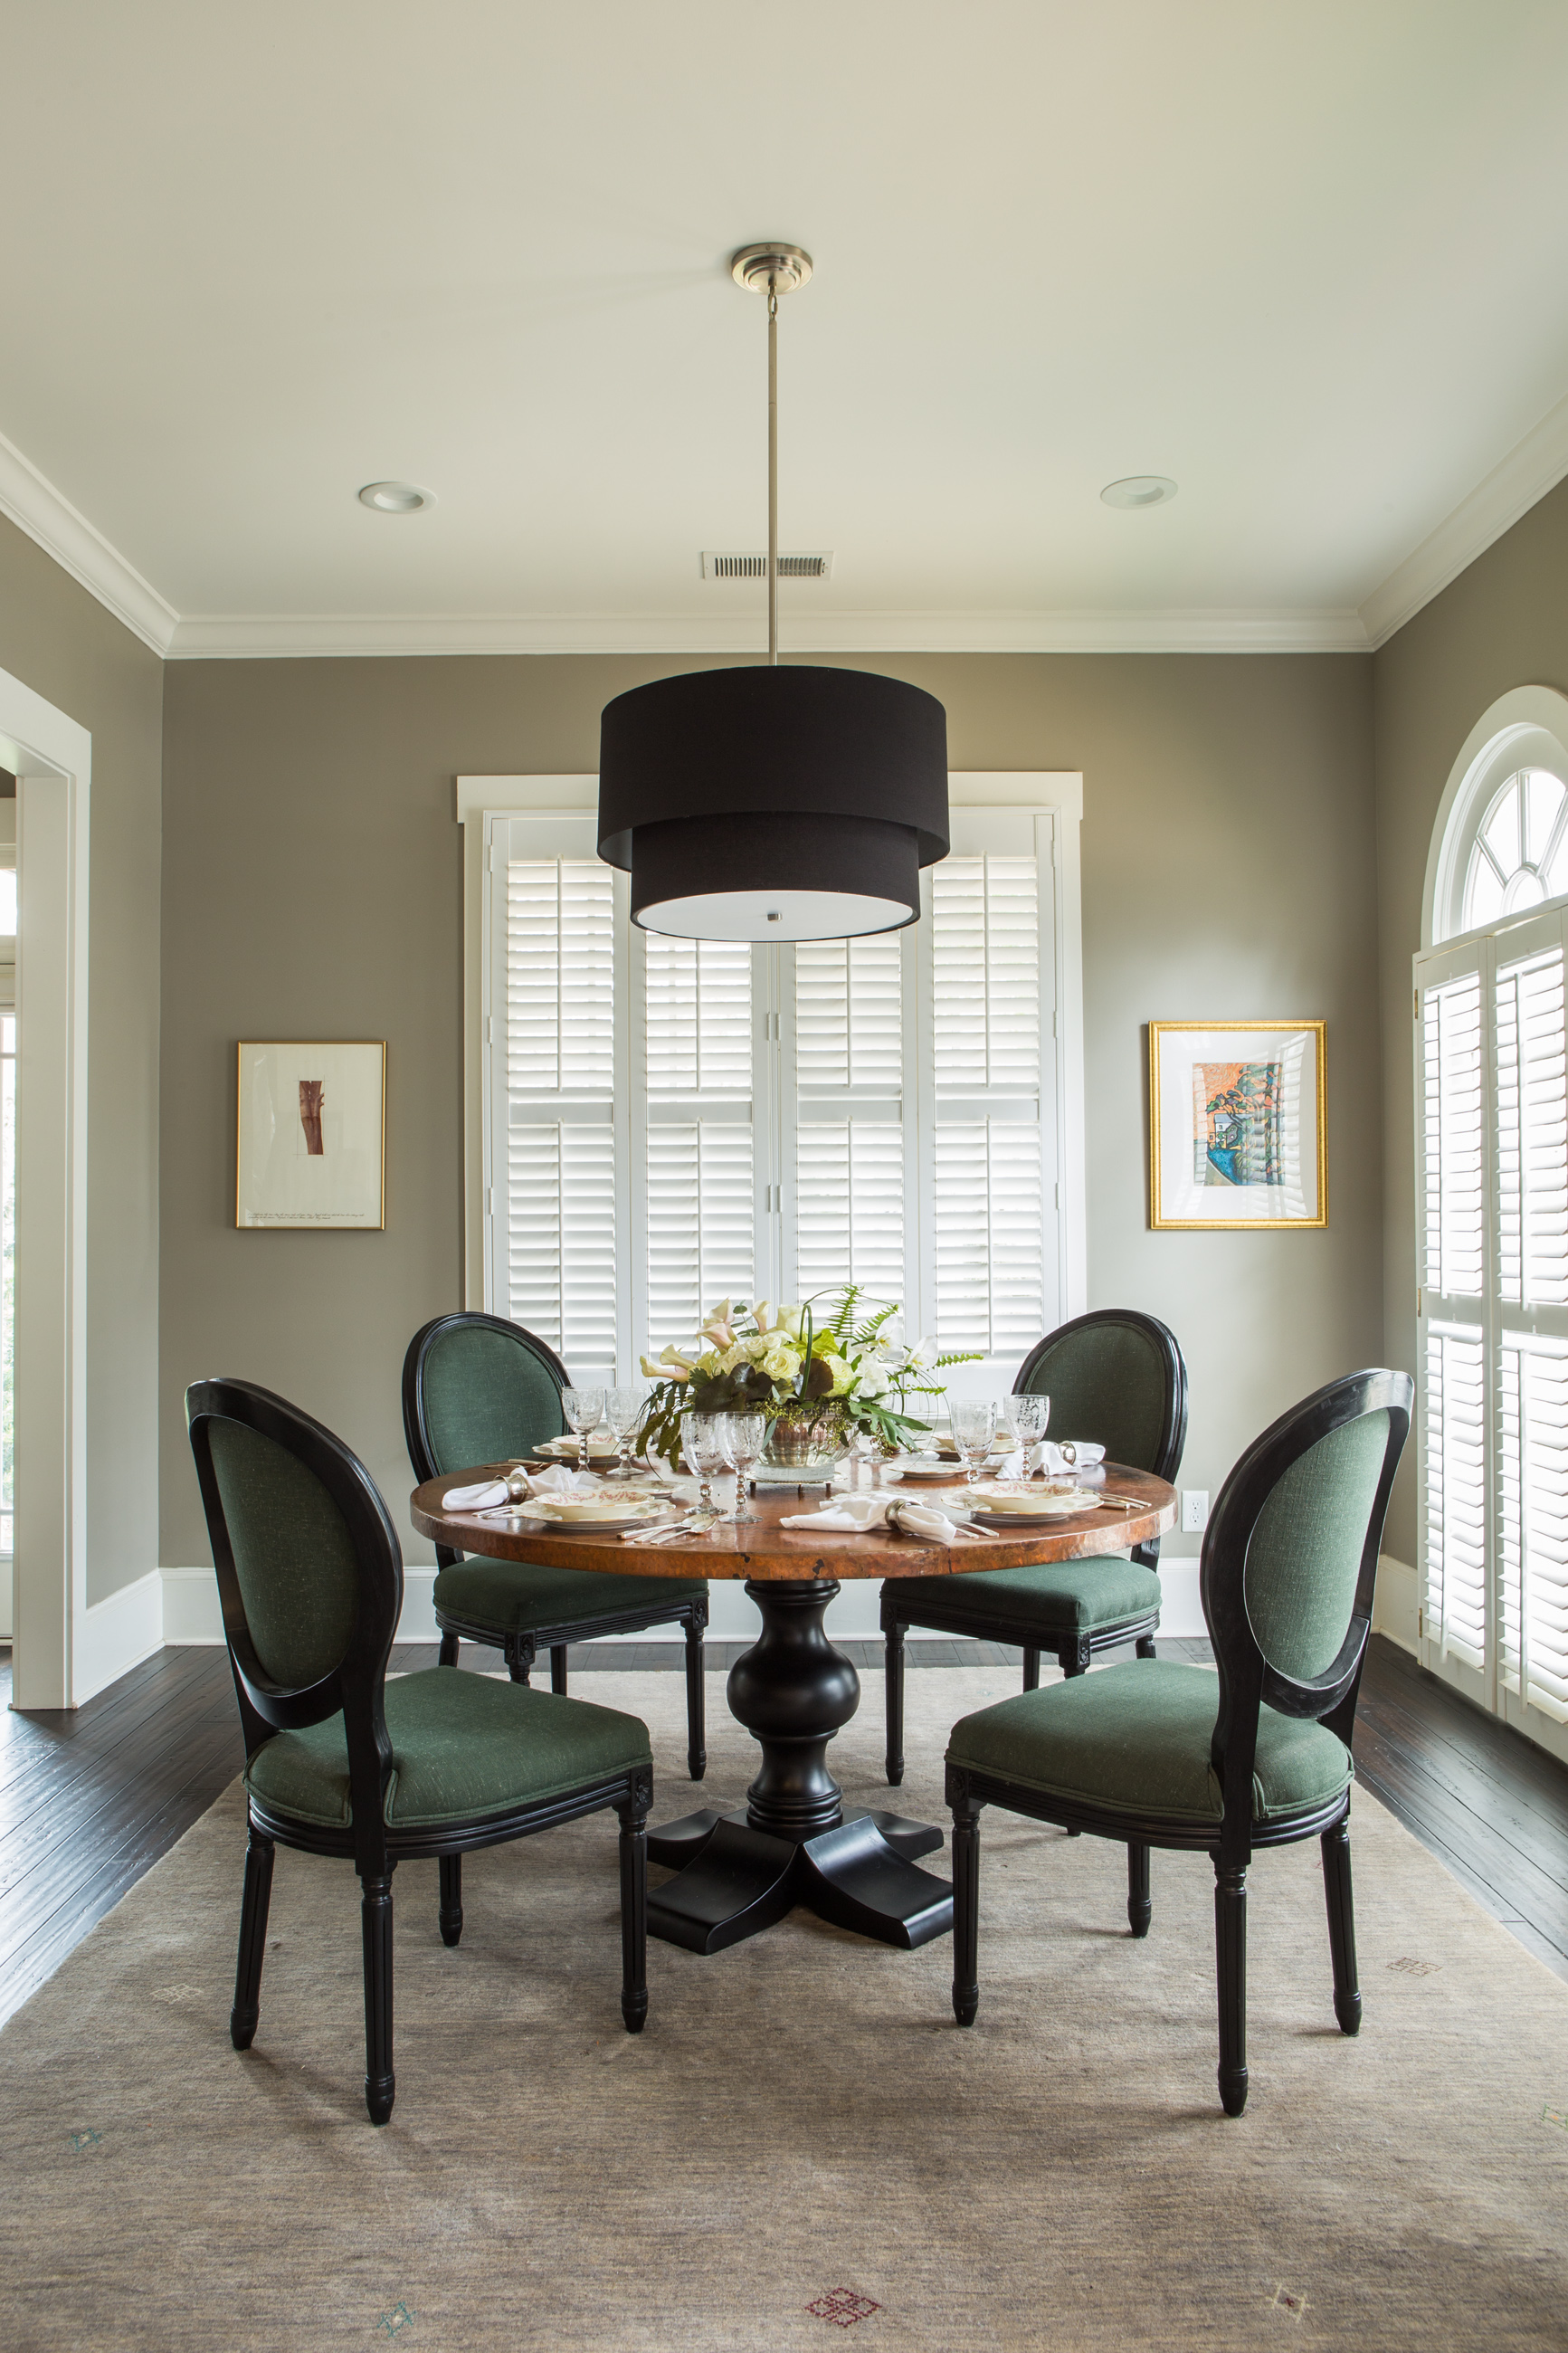 The dining room set for four rests in Sherwin-Williams ‘Intellectual Gray.’